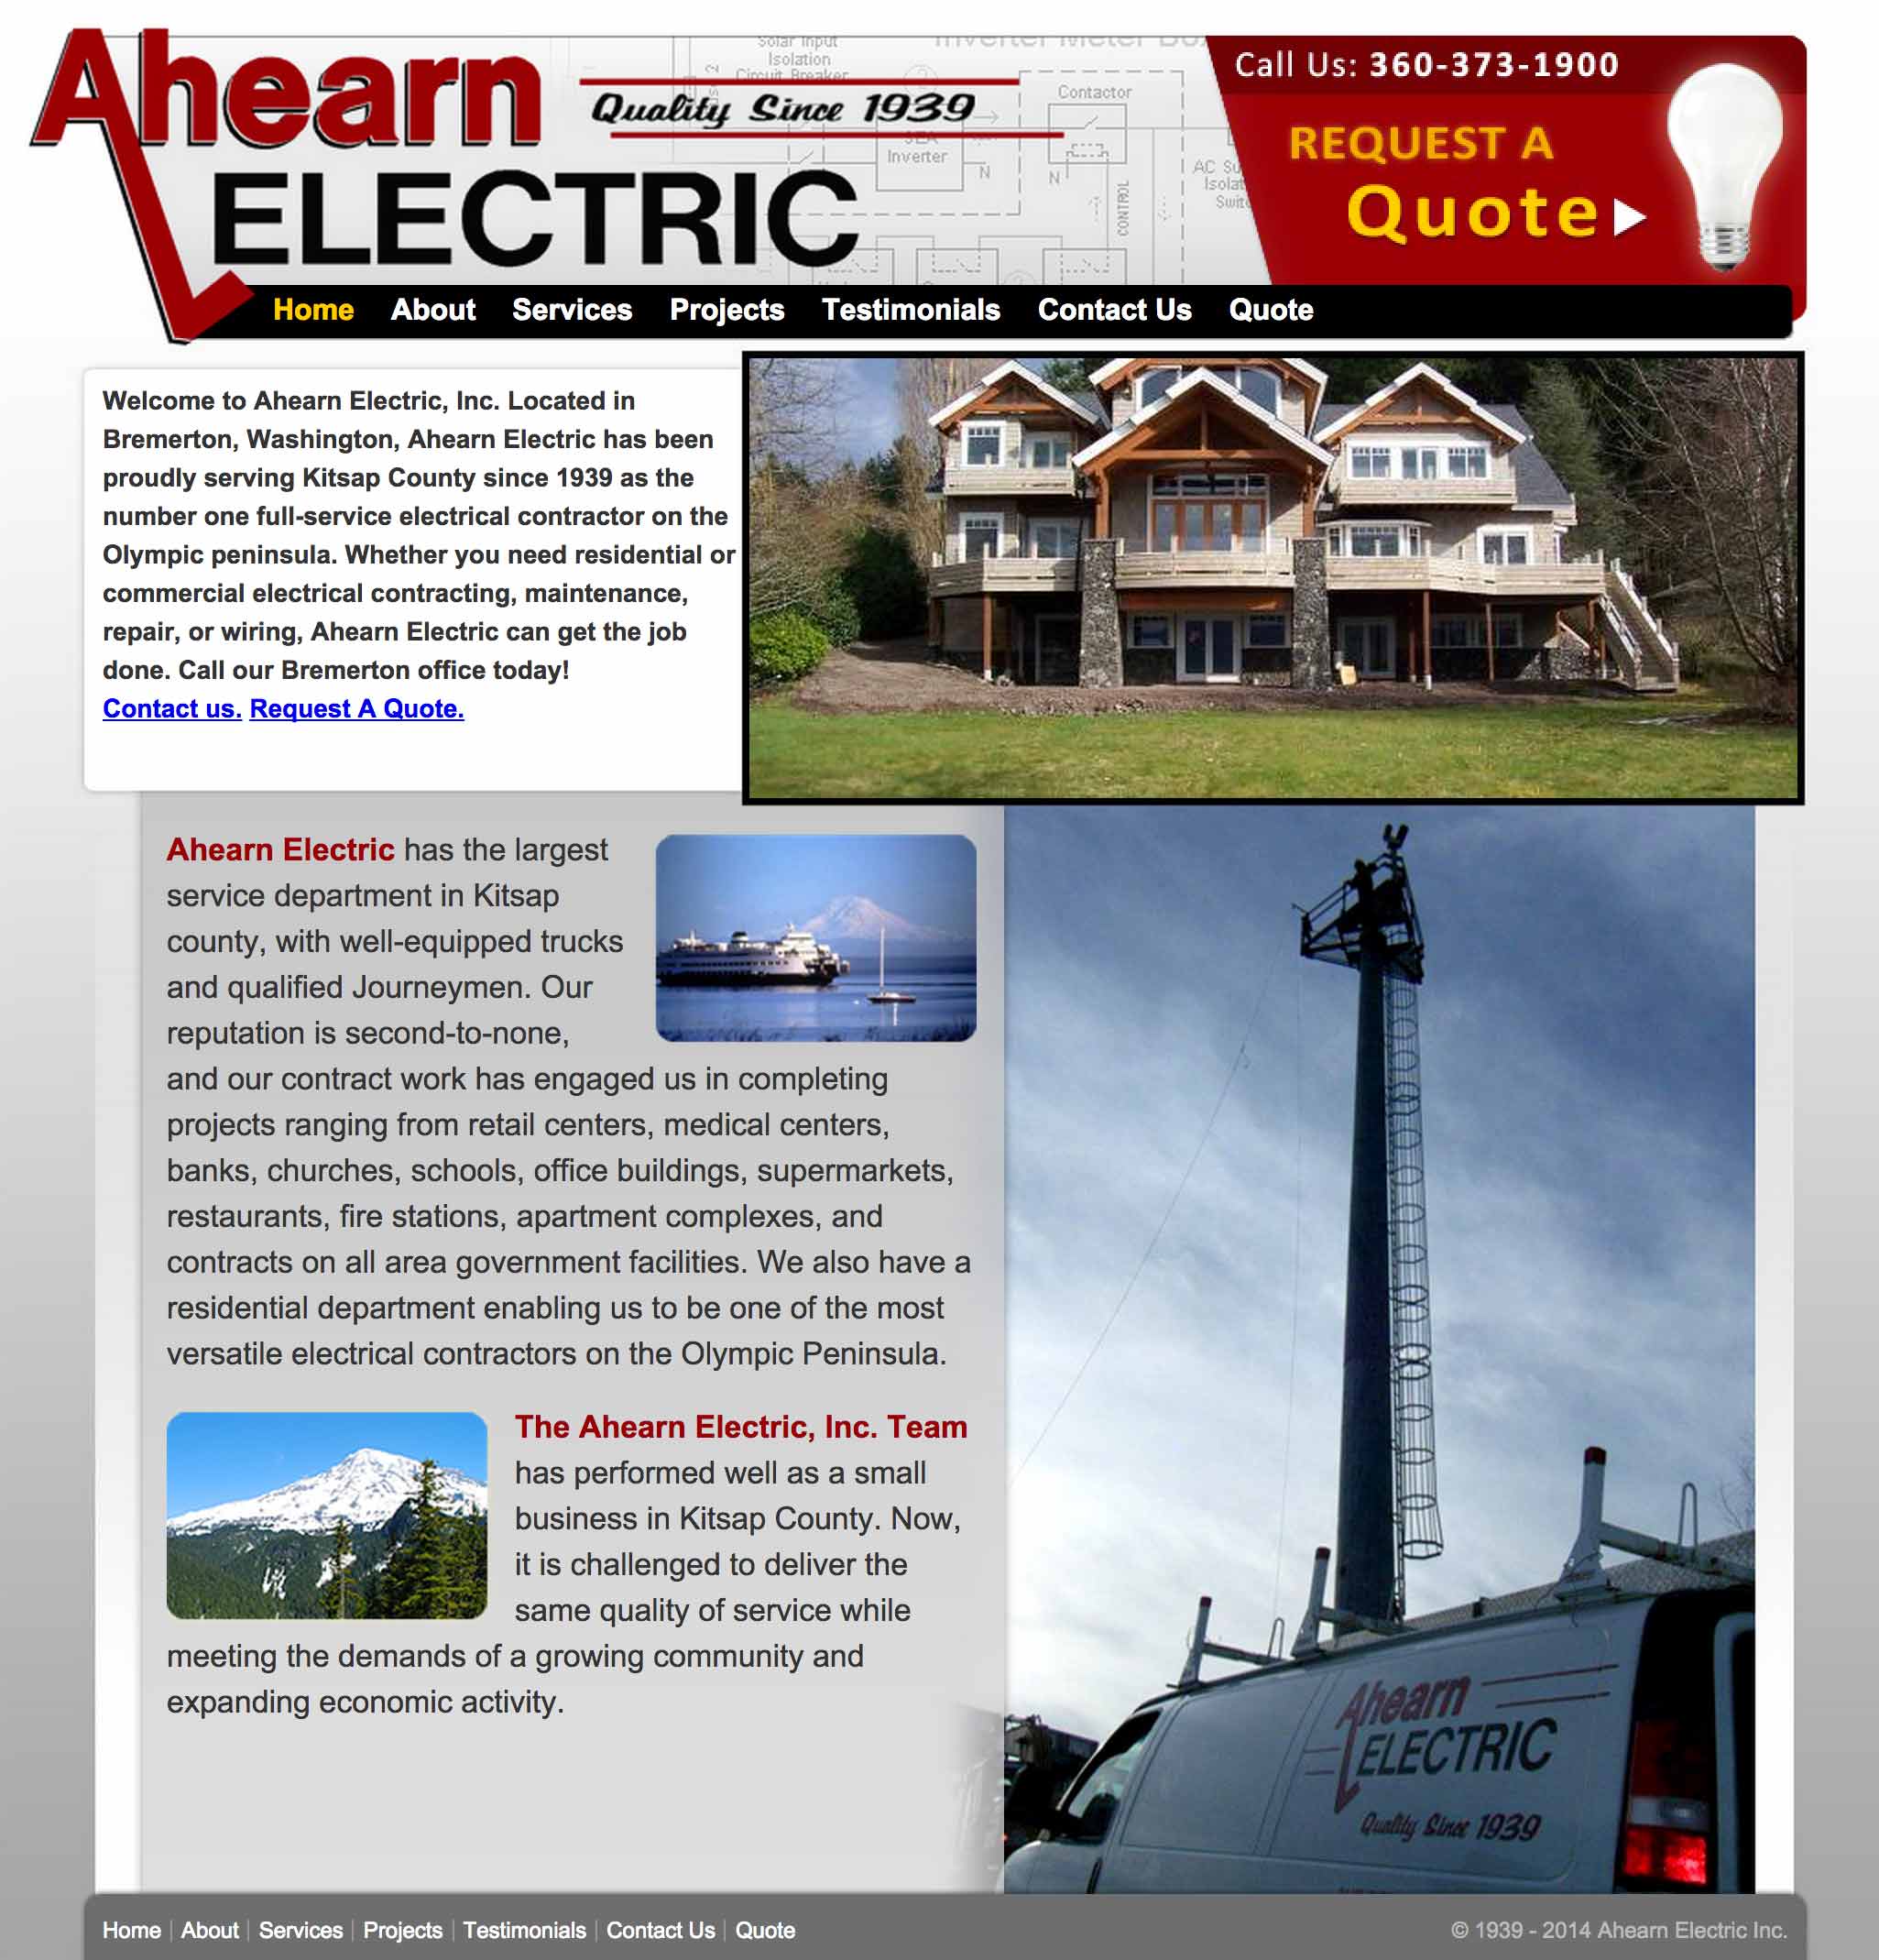 Screen shot of the Ahearn Electric web site by Lee Powers.